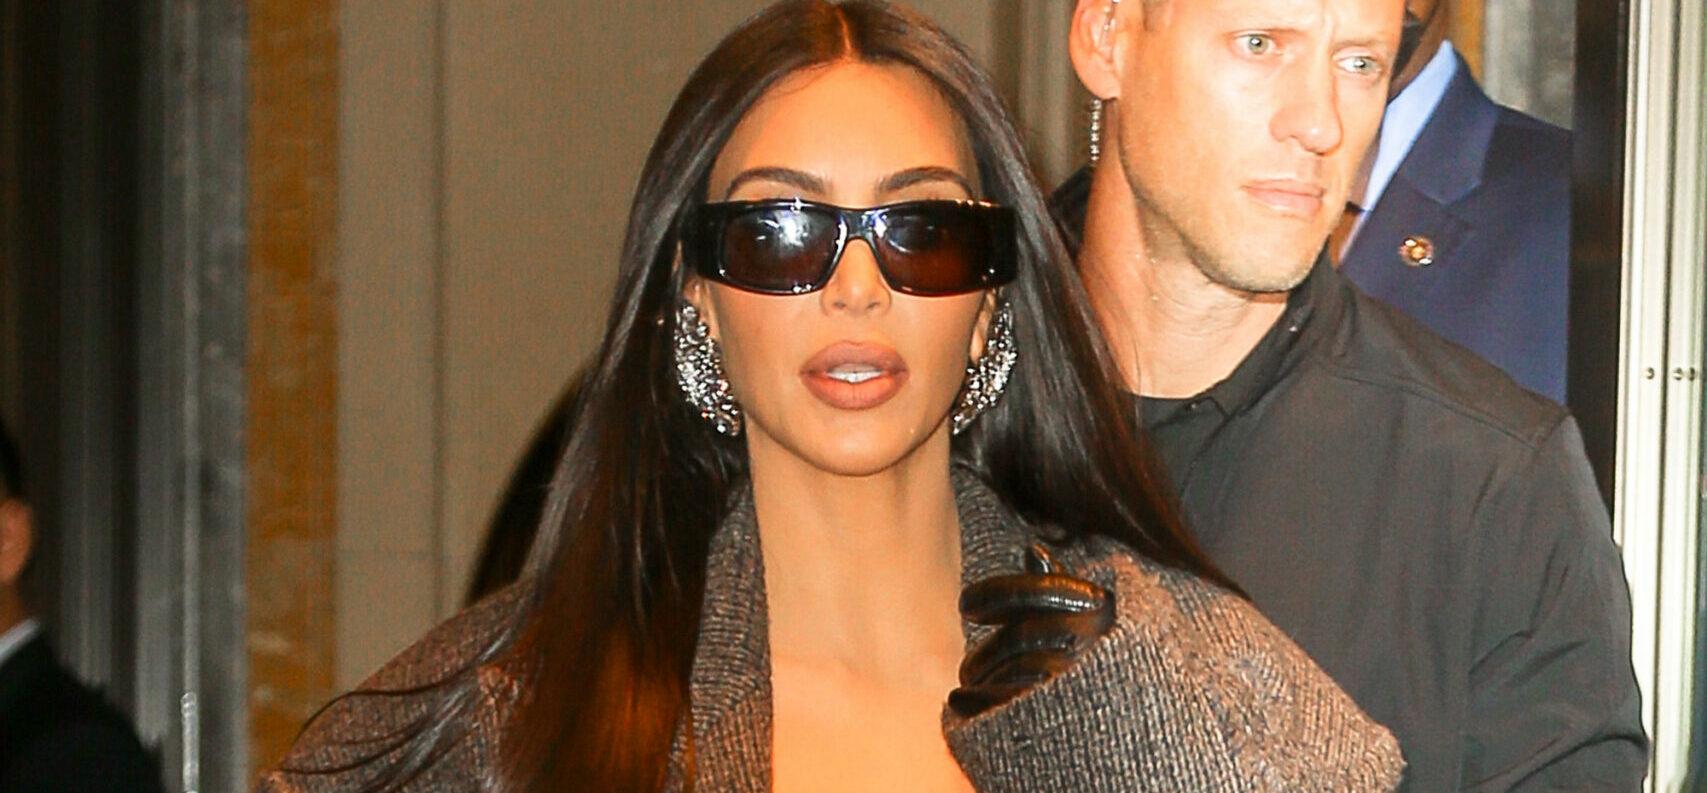 Kim Kardashian seen wearing thigh-high boots while leaving her hotel in New York City on Nov 02 2021